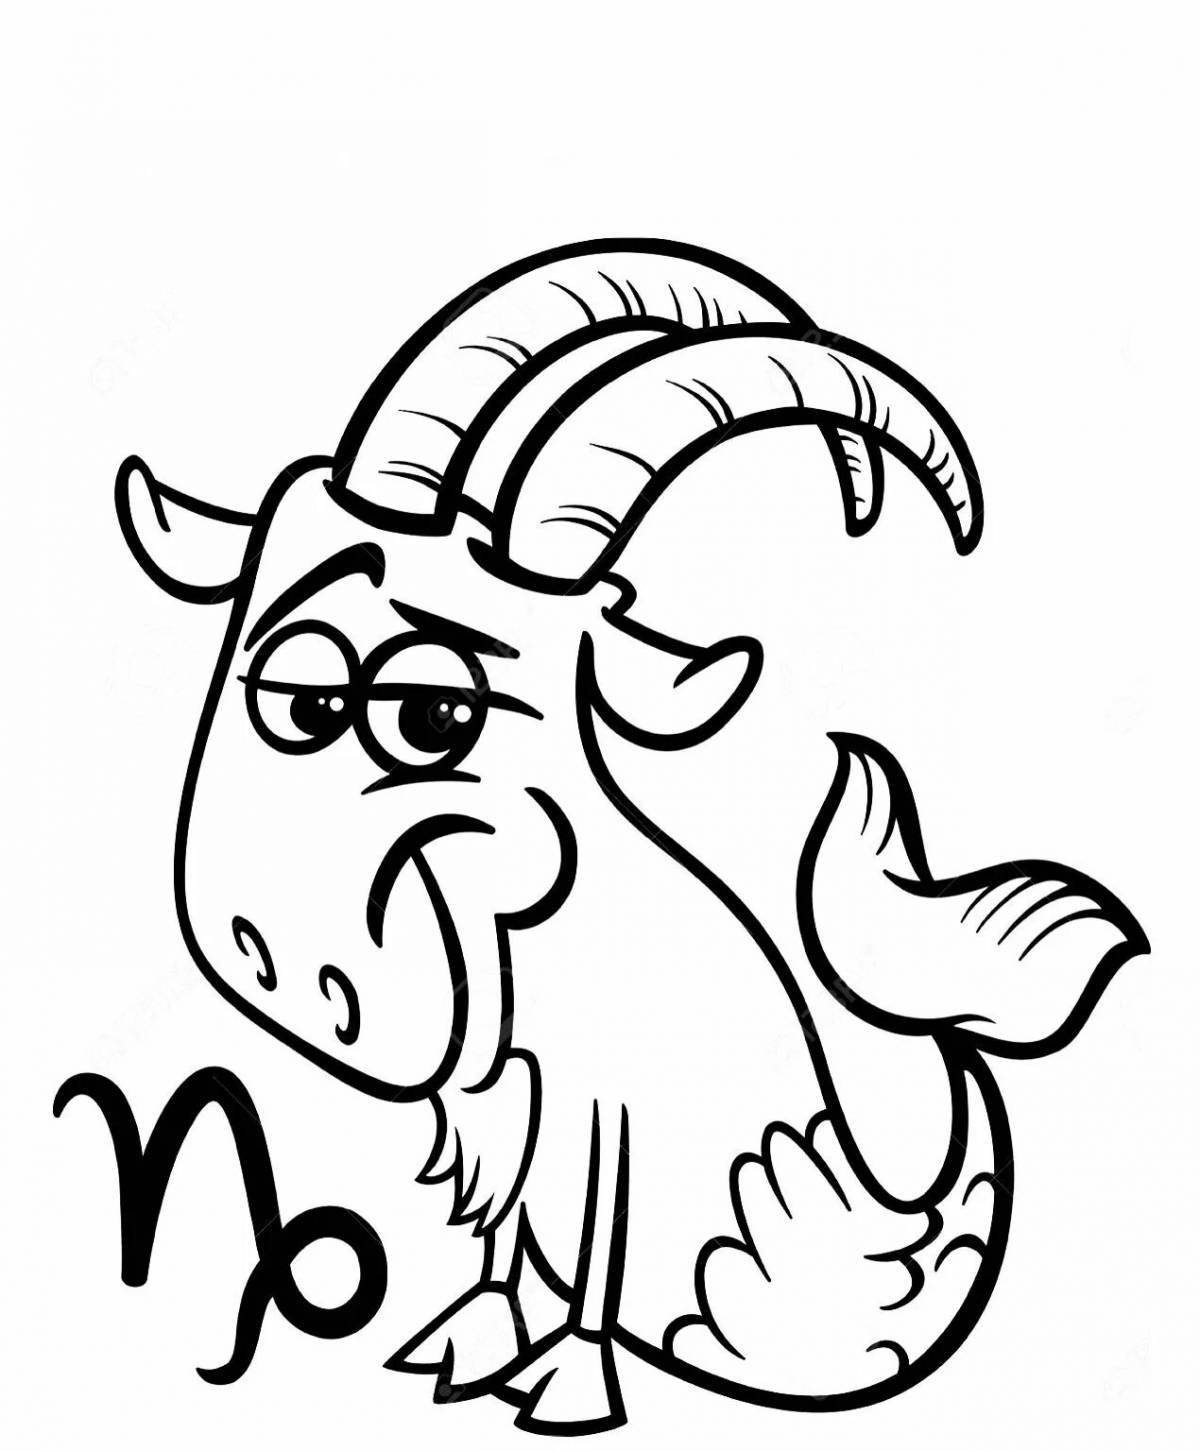 Coloring page glorious zodiac sign Capricorn